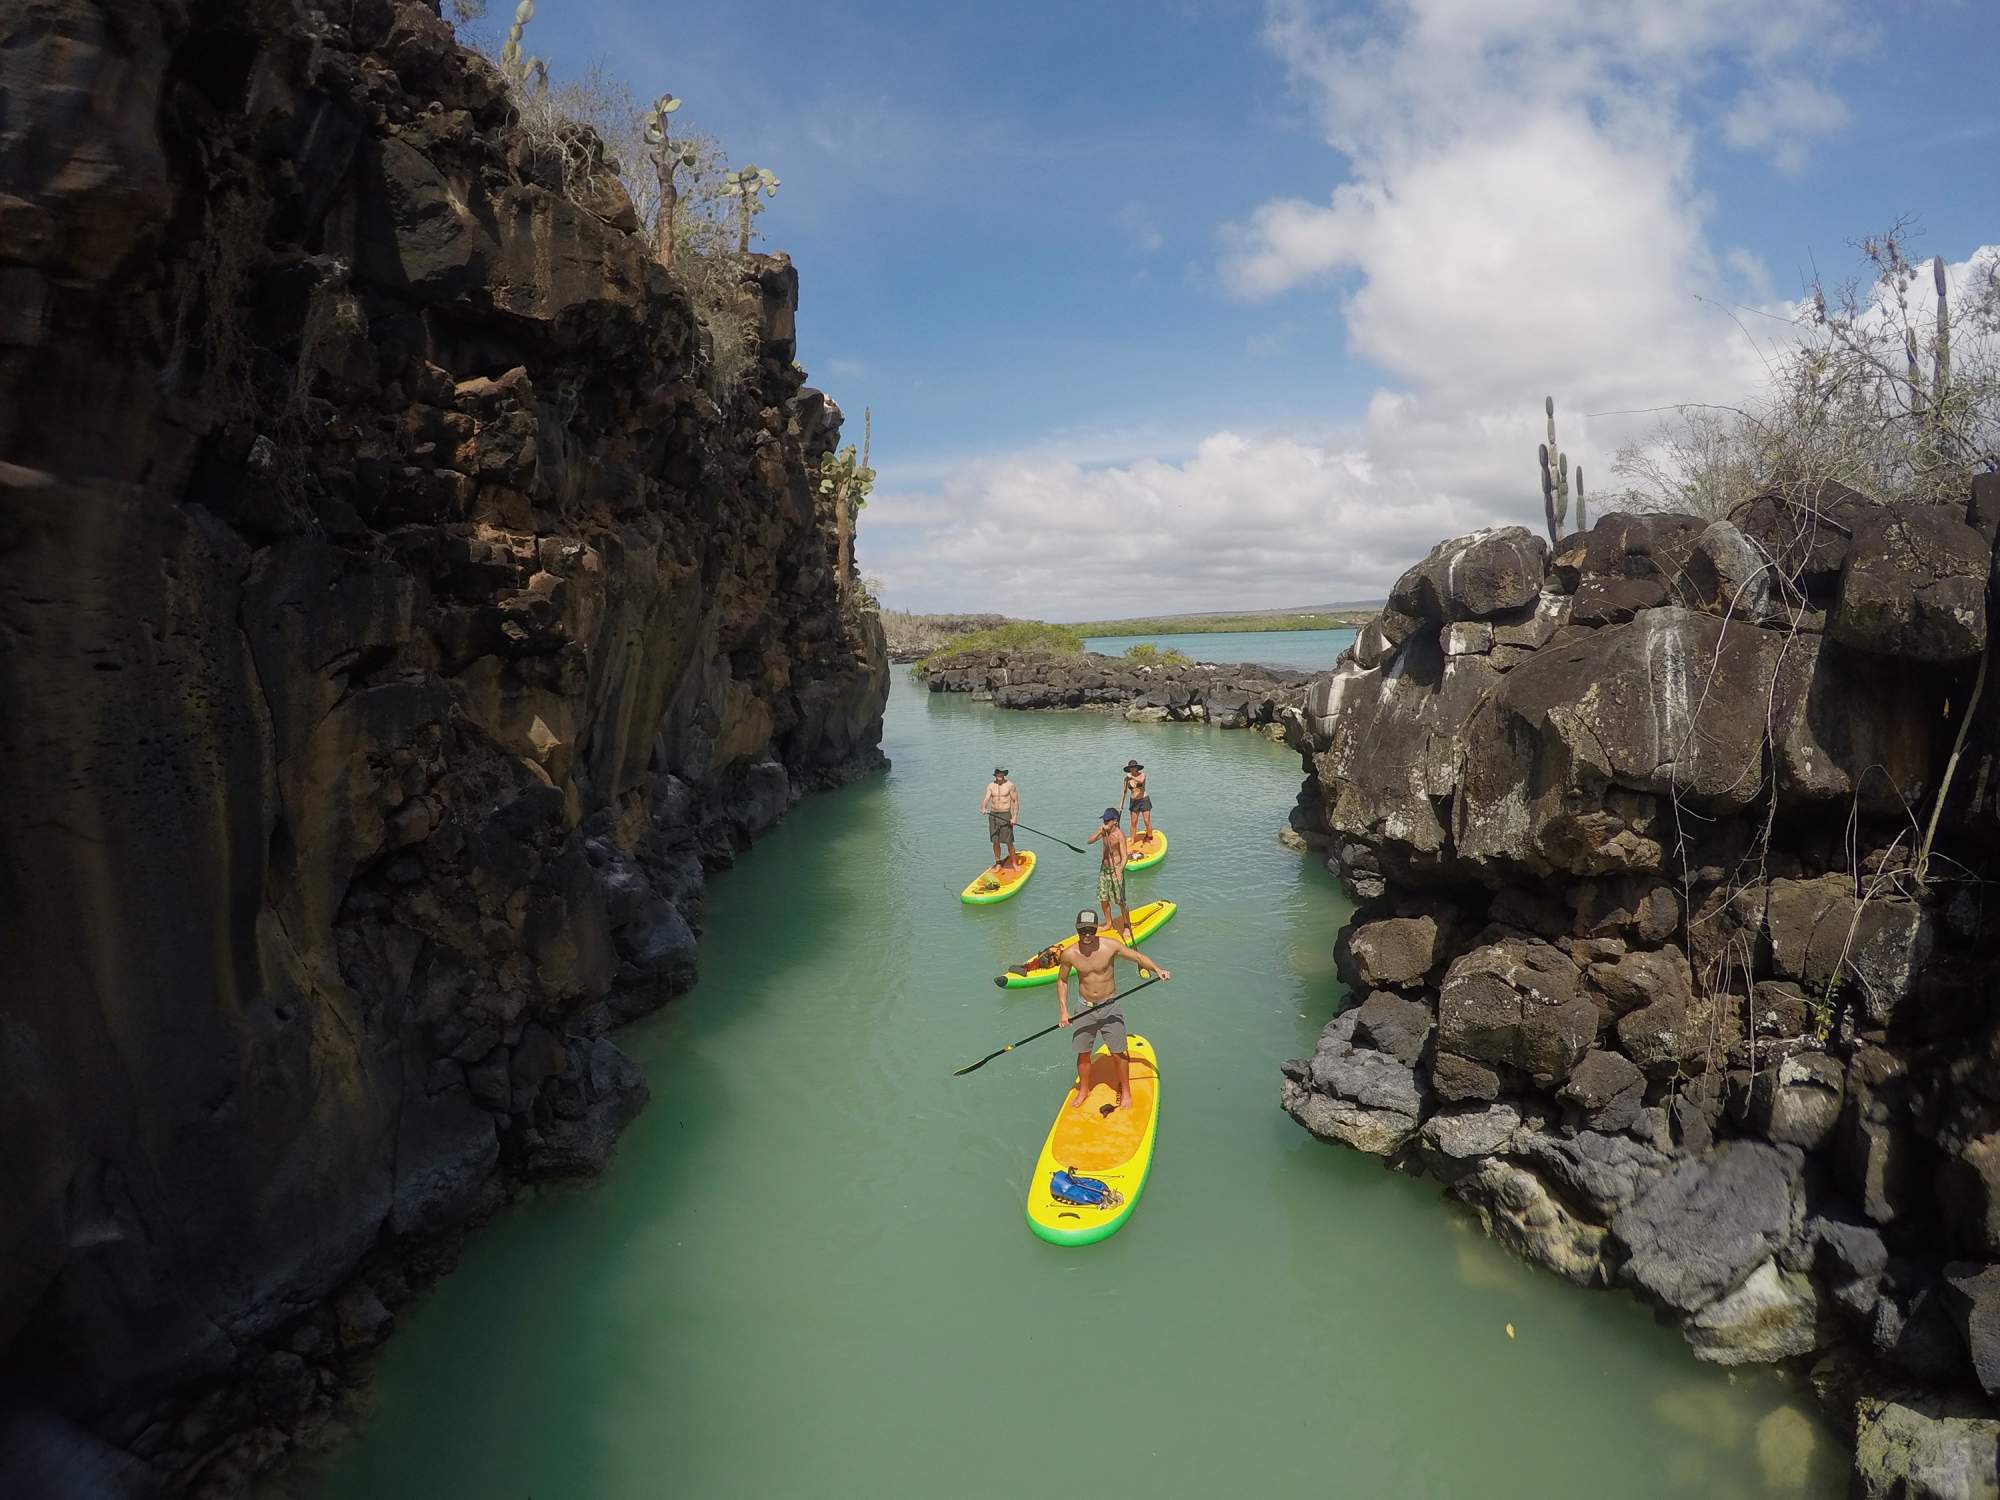 Group of people on standup paddle boards in the Galapagos Islands